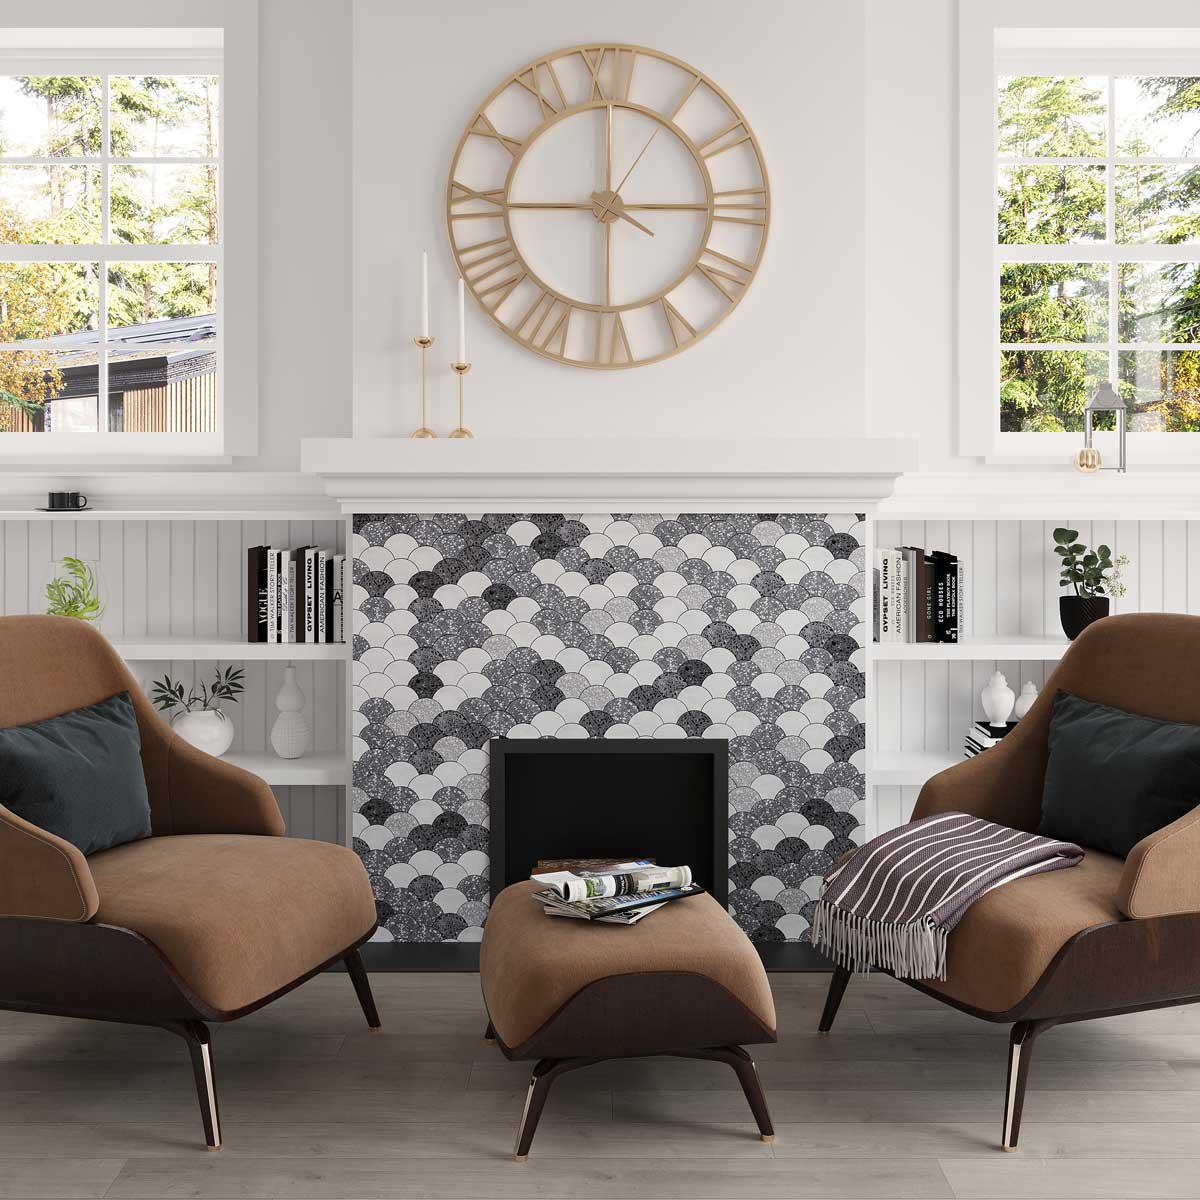 Contemporary living room with patterned scale mosaic tile